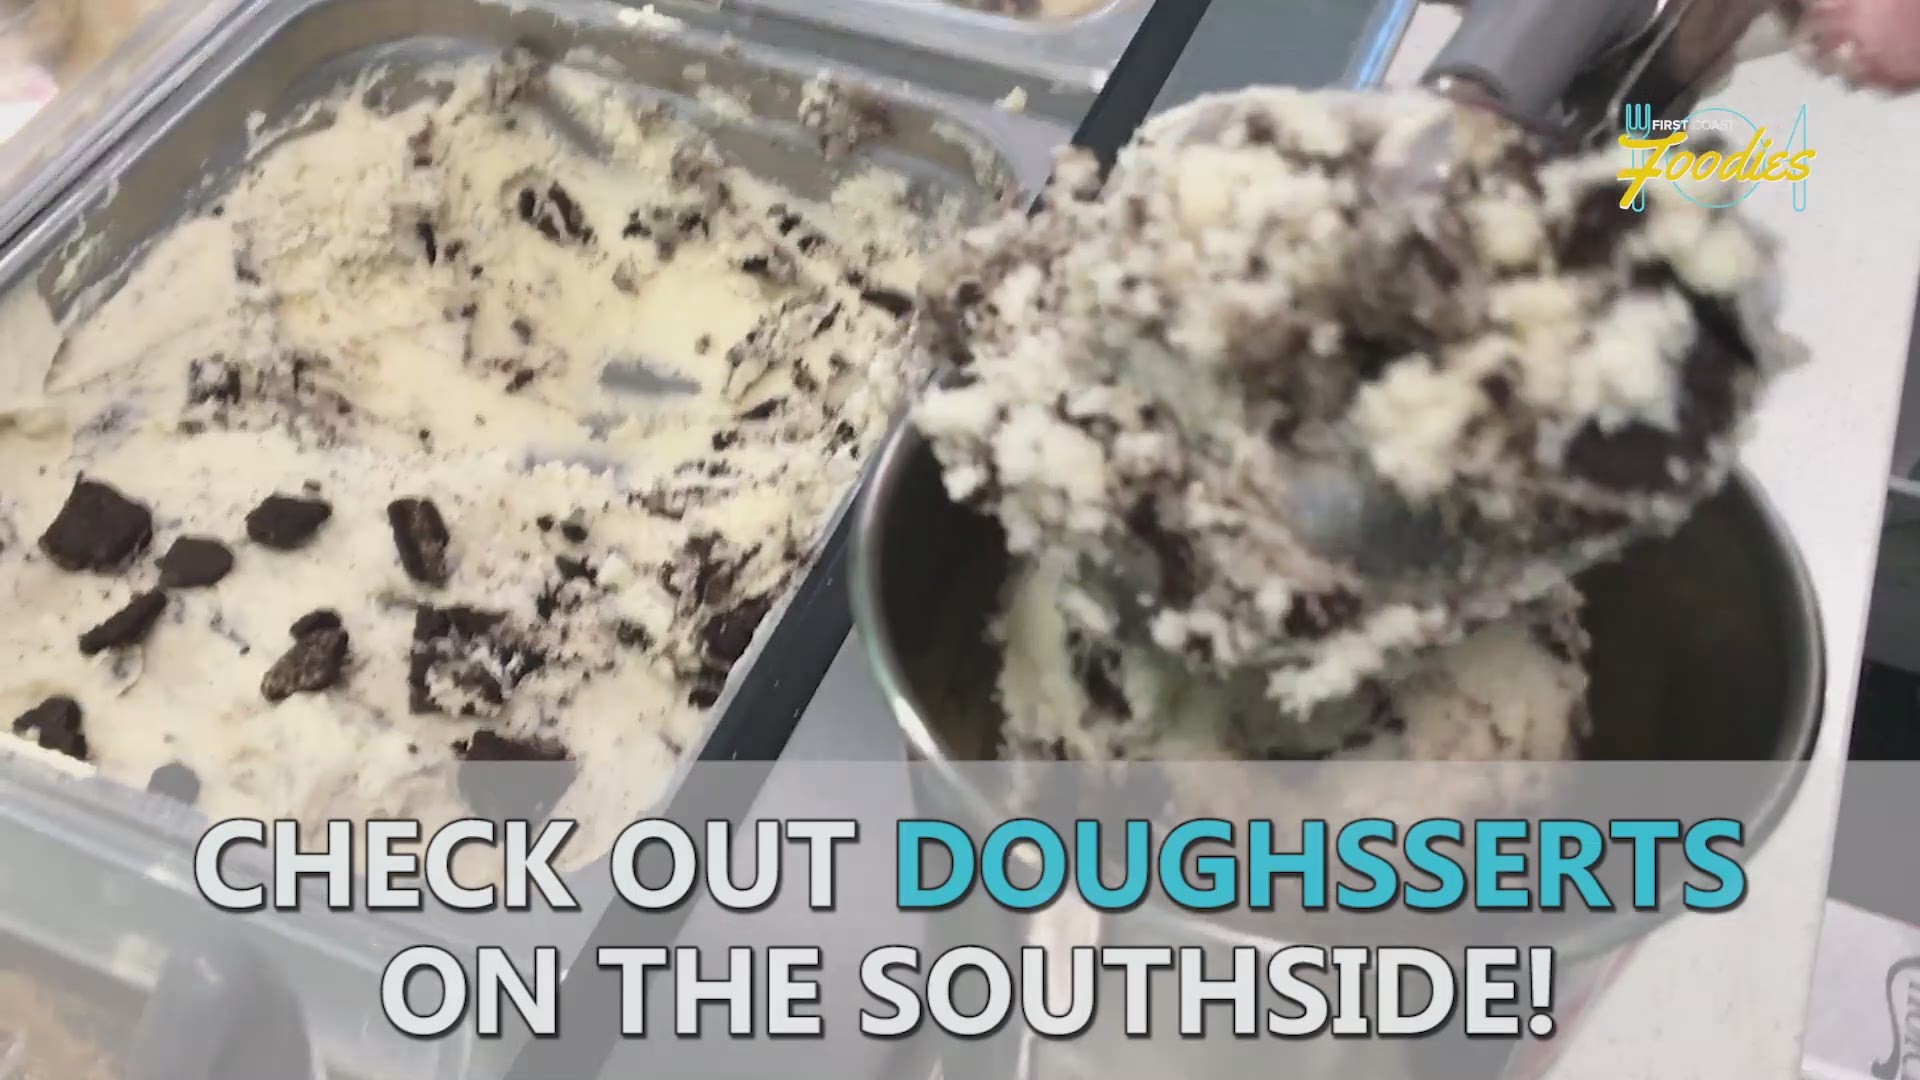 Doughsserts offers 14 different cookie dough flavors including vegan and gluten-free options. They also offer other tasty treats like the Brookie Bar and cookie dough milkshakes!